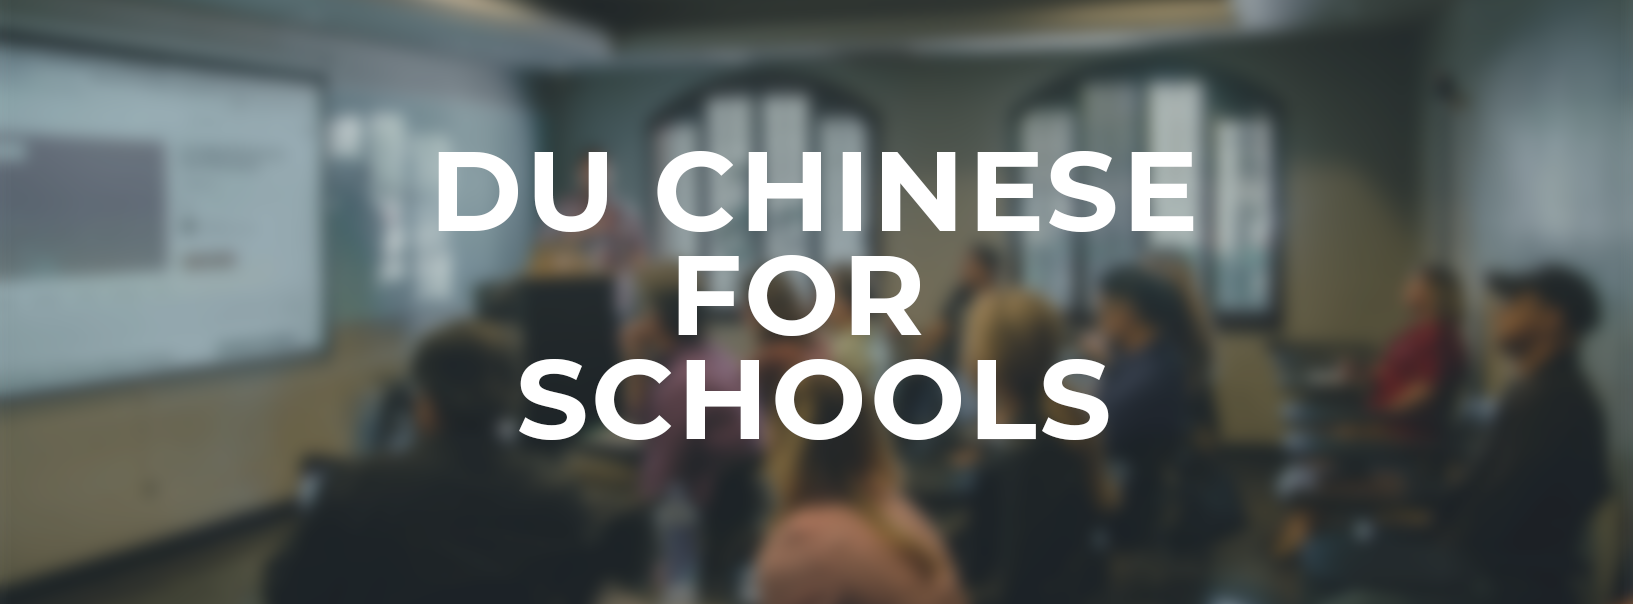 Du Chinese for Schools